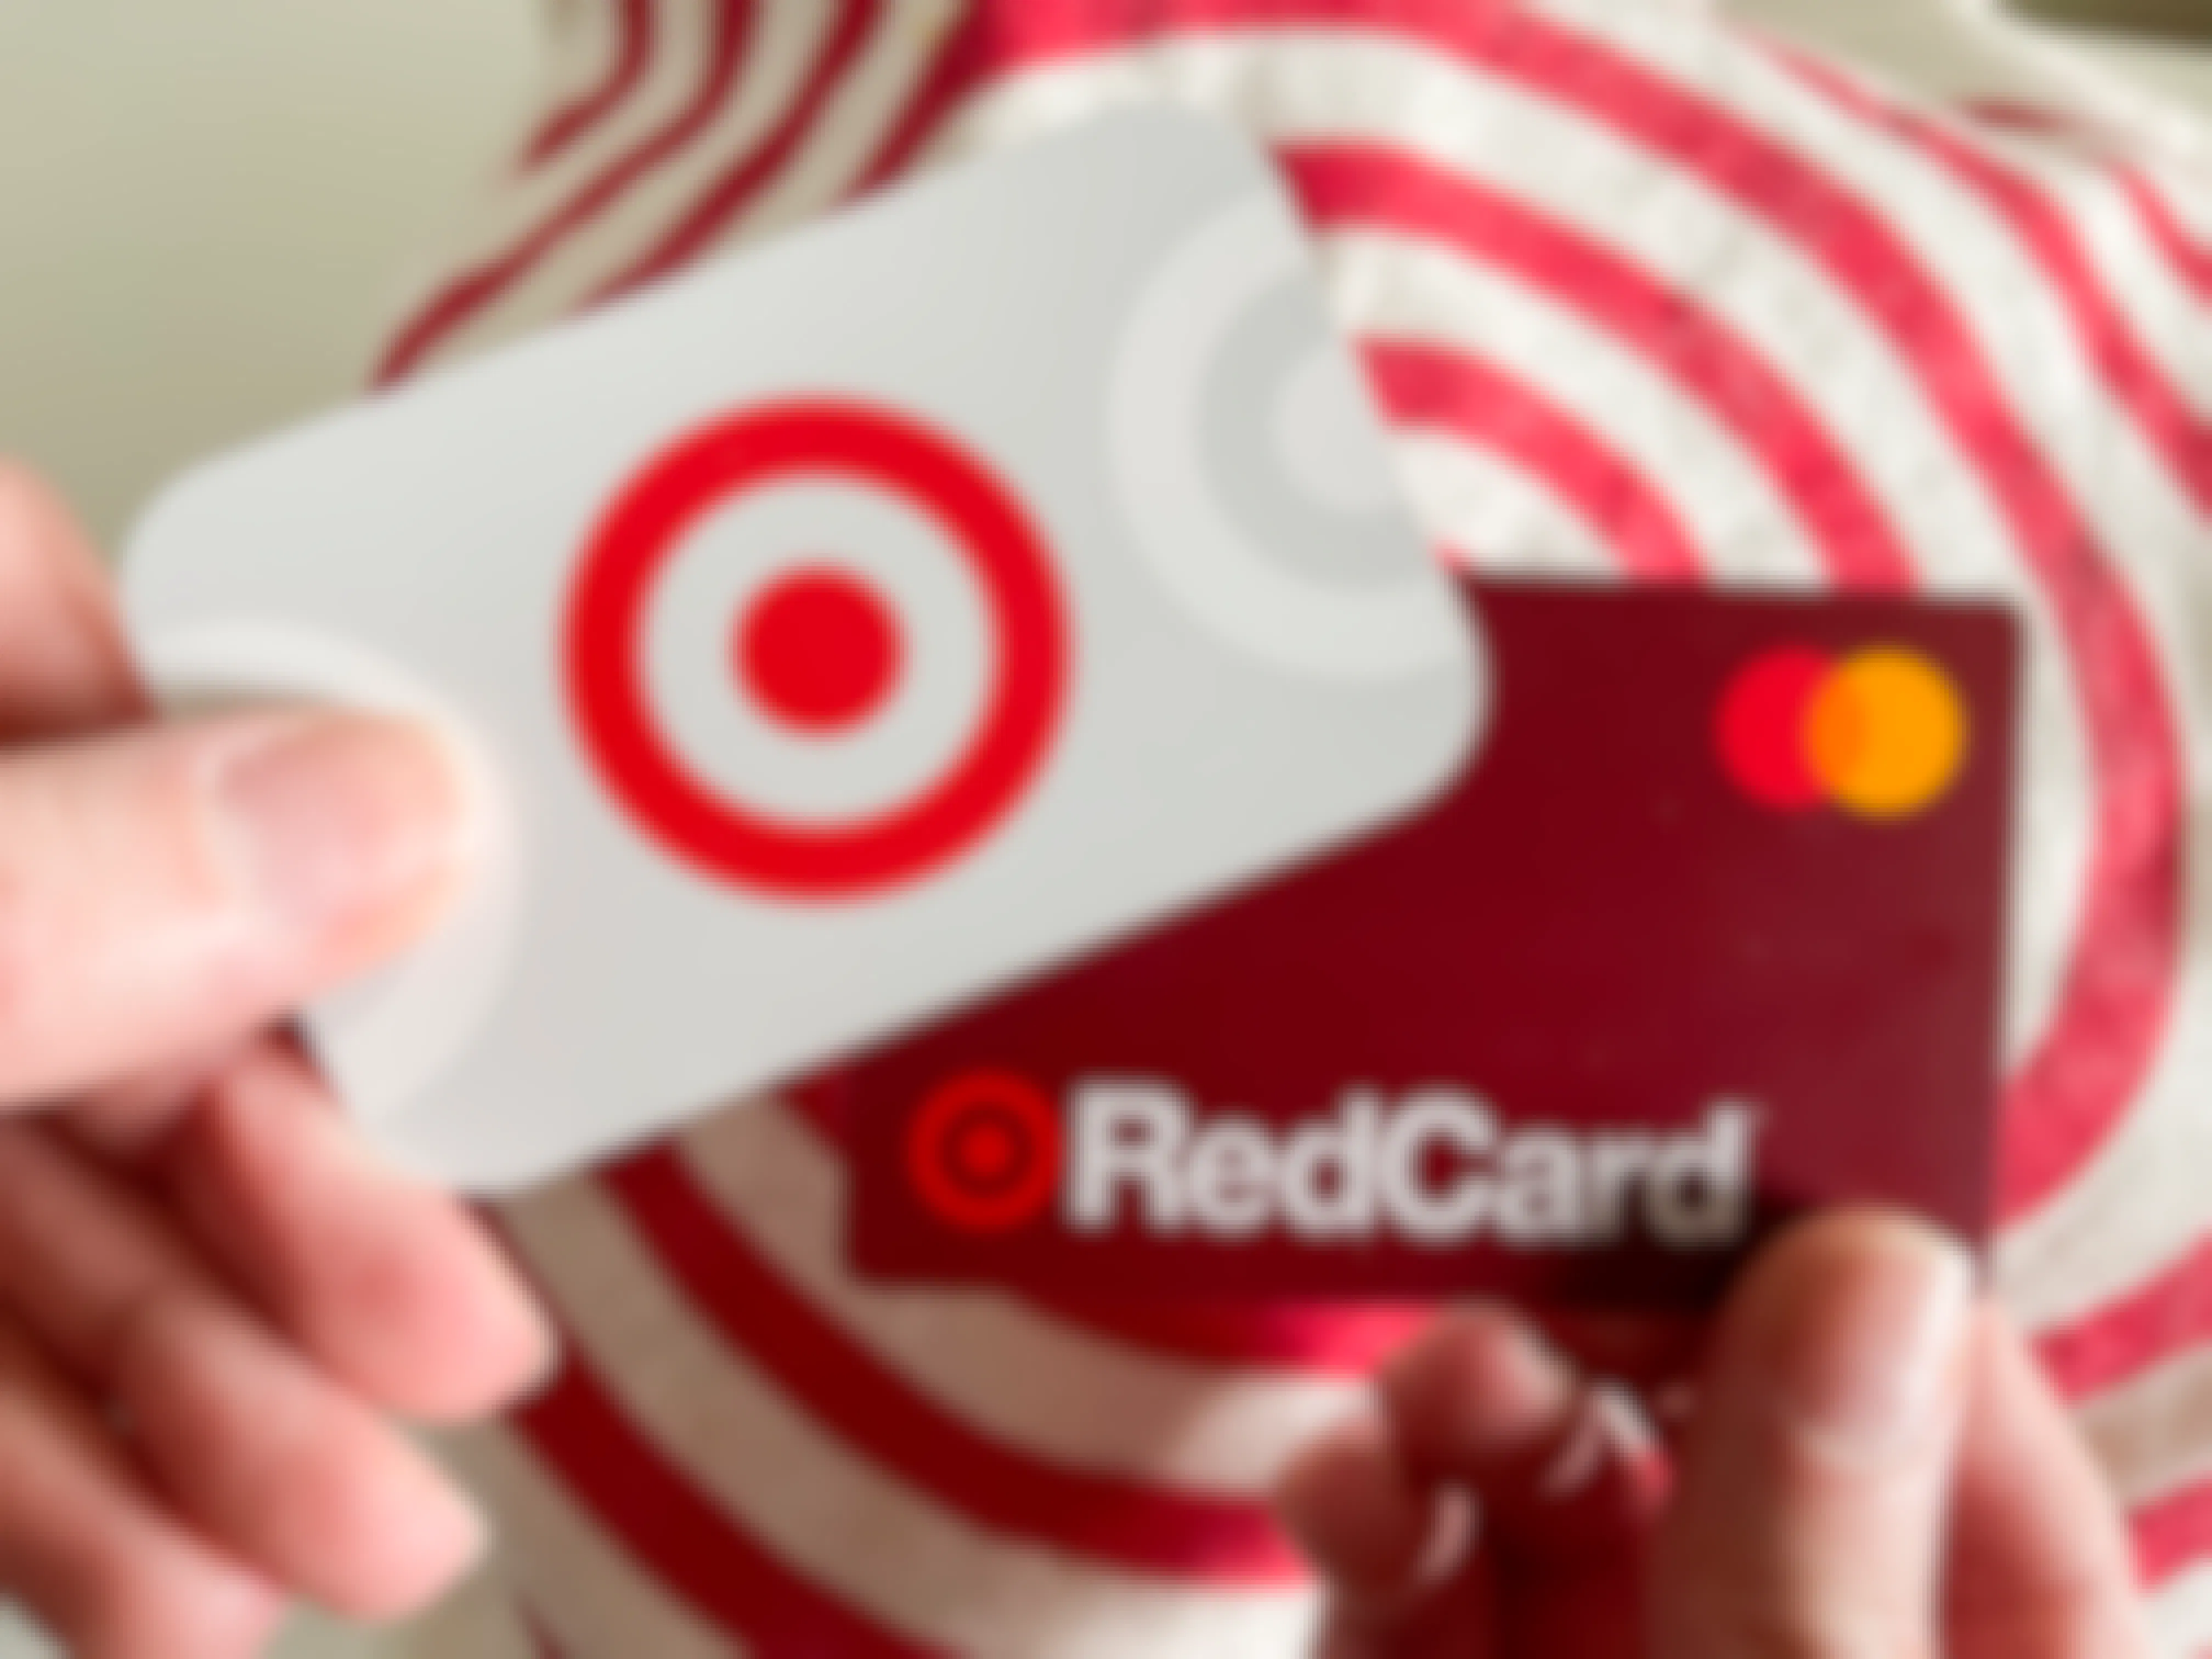 A person's hands, one holding a Target gift card, and the other holding a Target RedCard, in front of a Target bag.